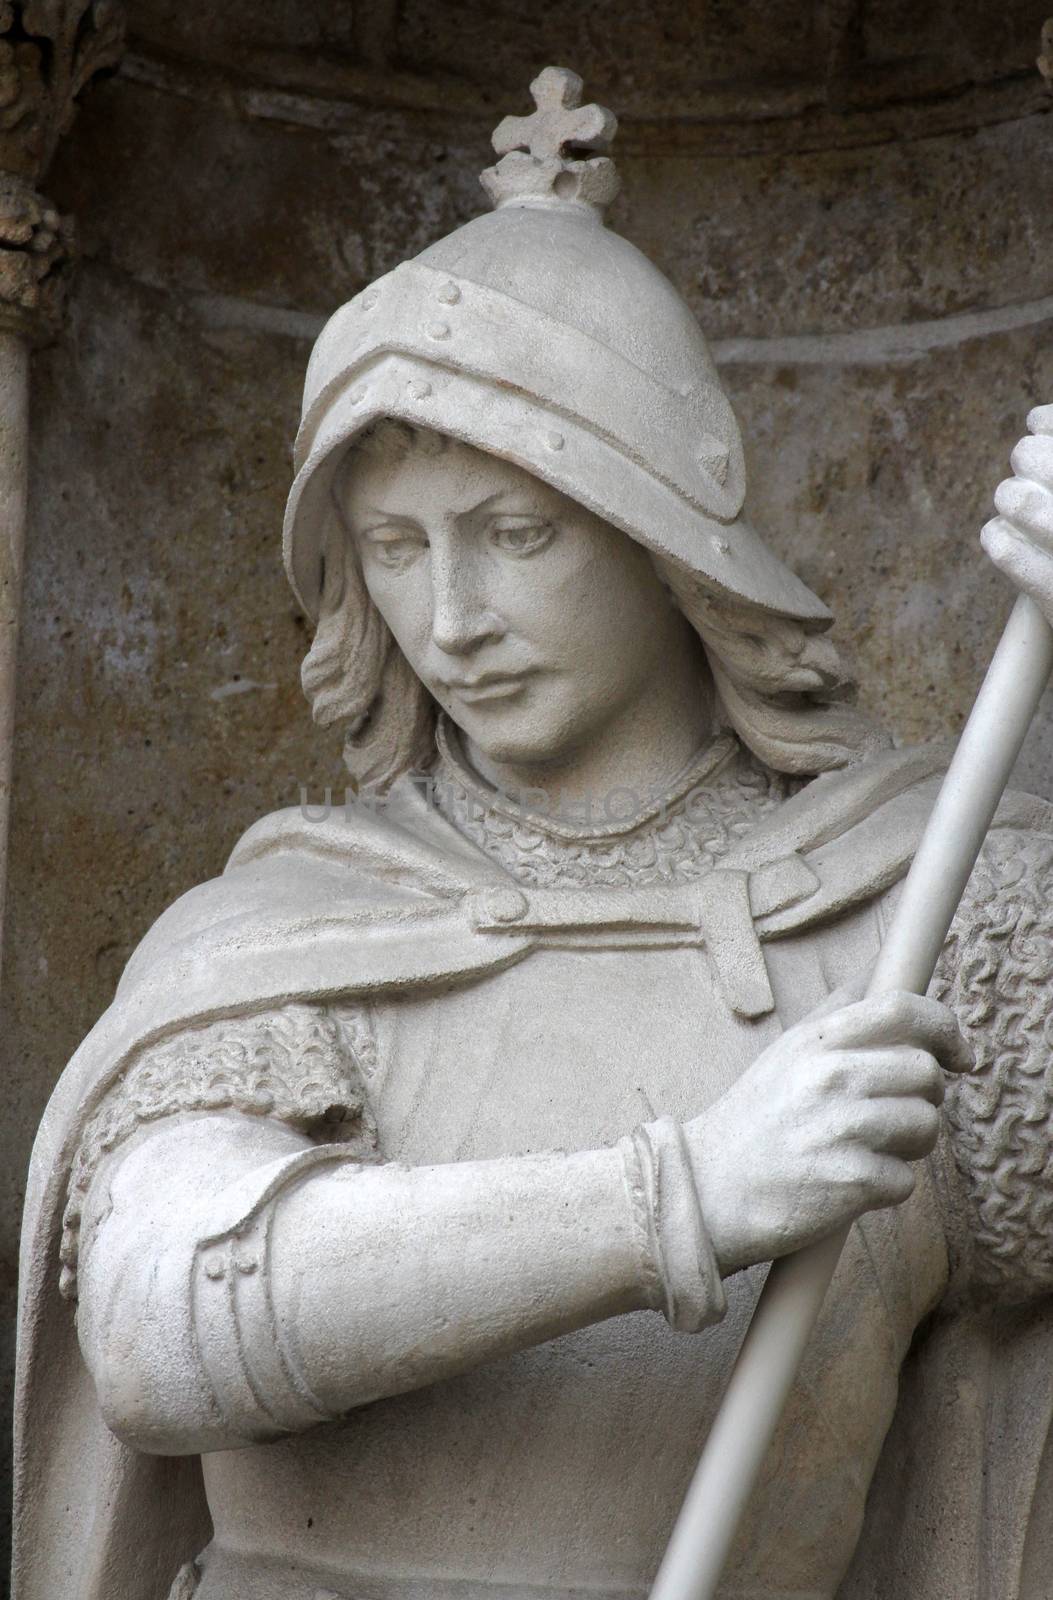 Statue of Saint George on the portal of the cathedral dedicated to the Assumption of Mary in Zagreb